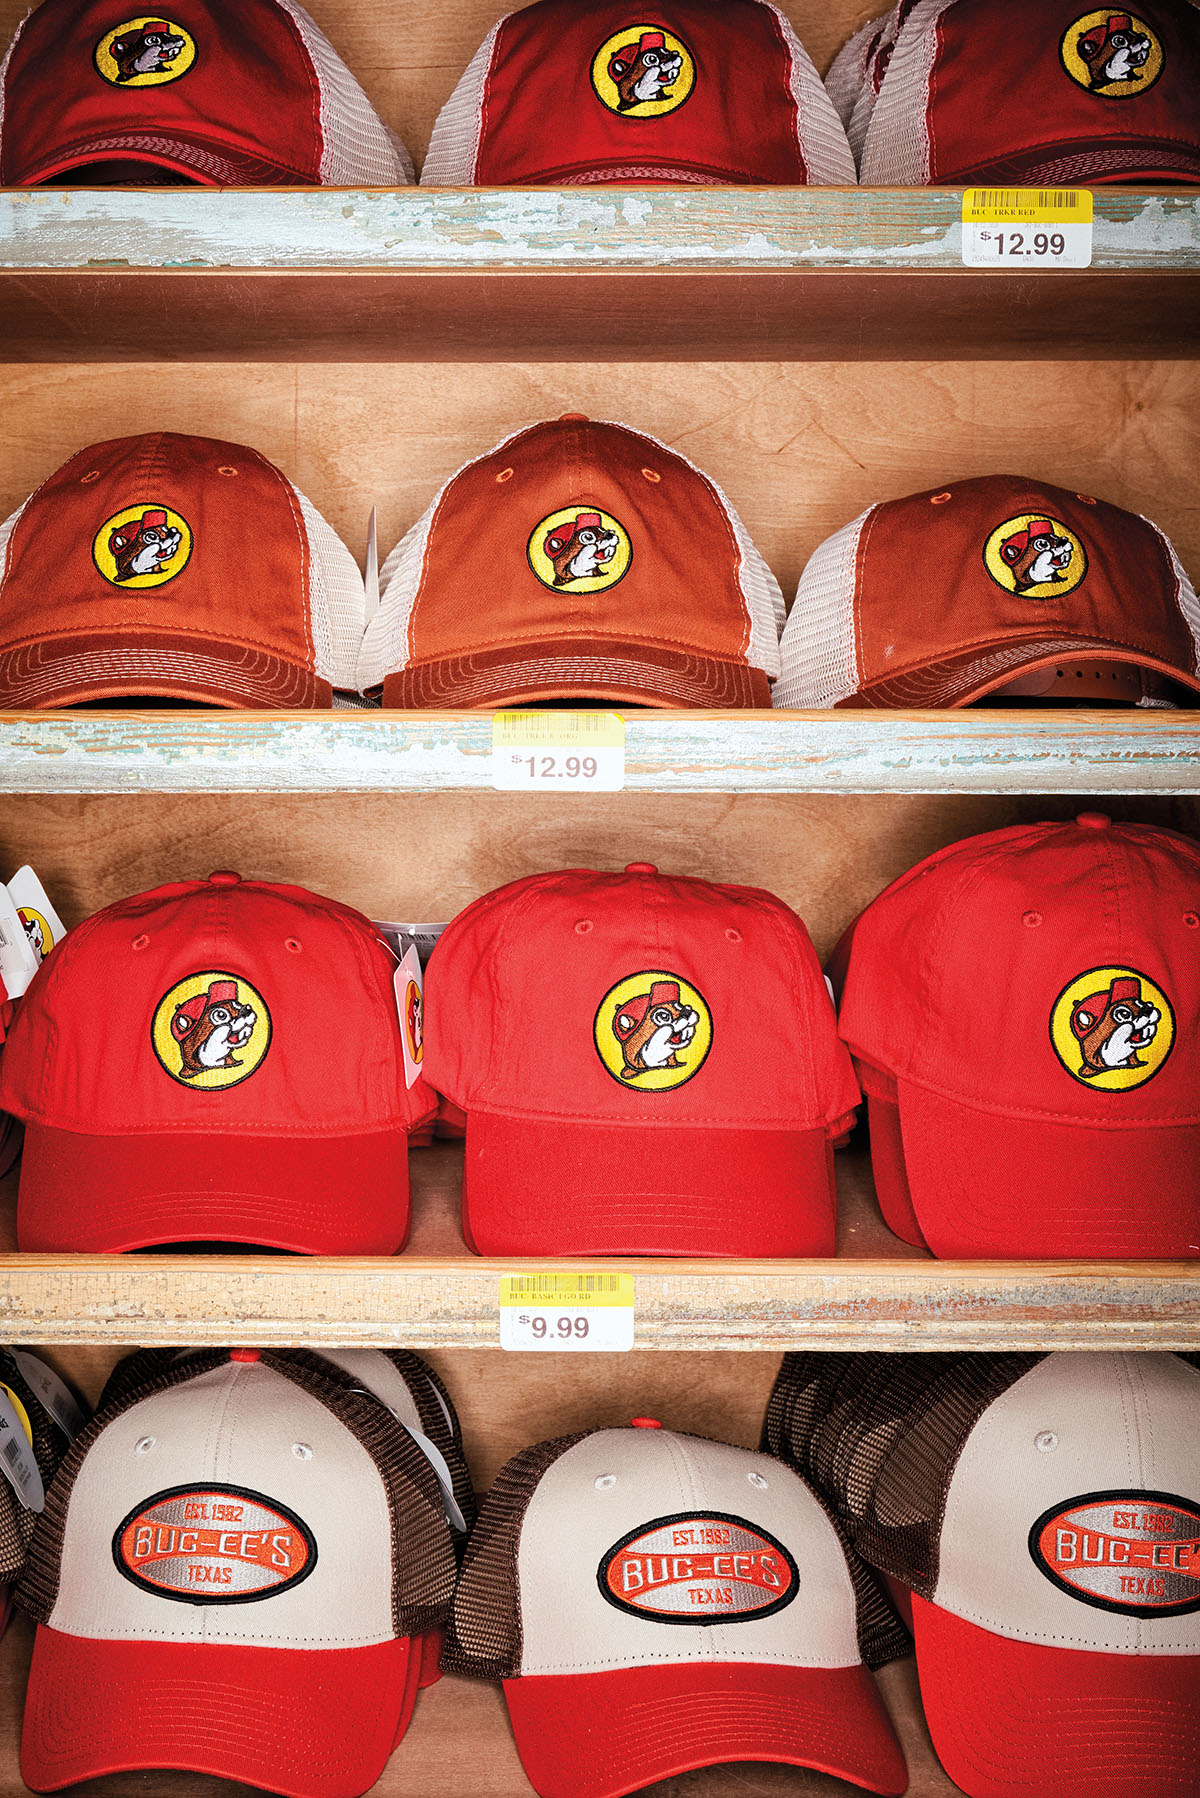 A collection of brown, red and white baseball hats featuring Buc-ee beaver